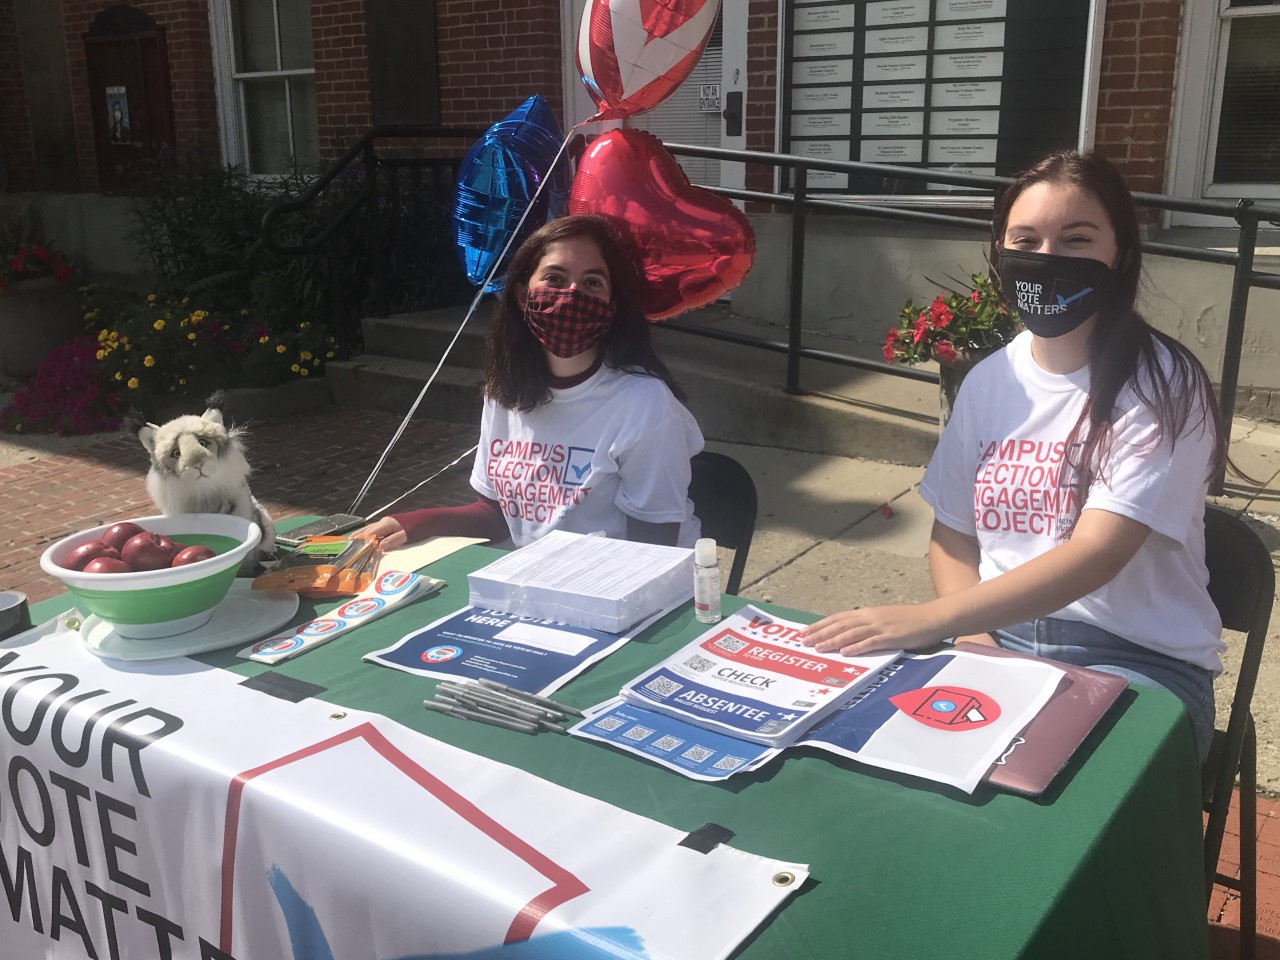 Campus Election Engagement Project Fellows Sarah Donaldson (left) and Reese Campbell share voter information outside the Athens County Courthouse before the November election.